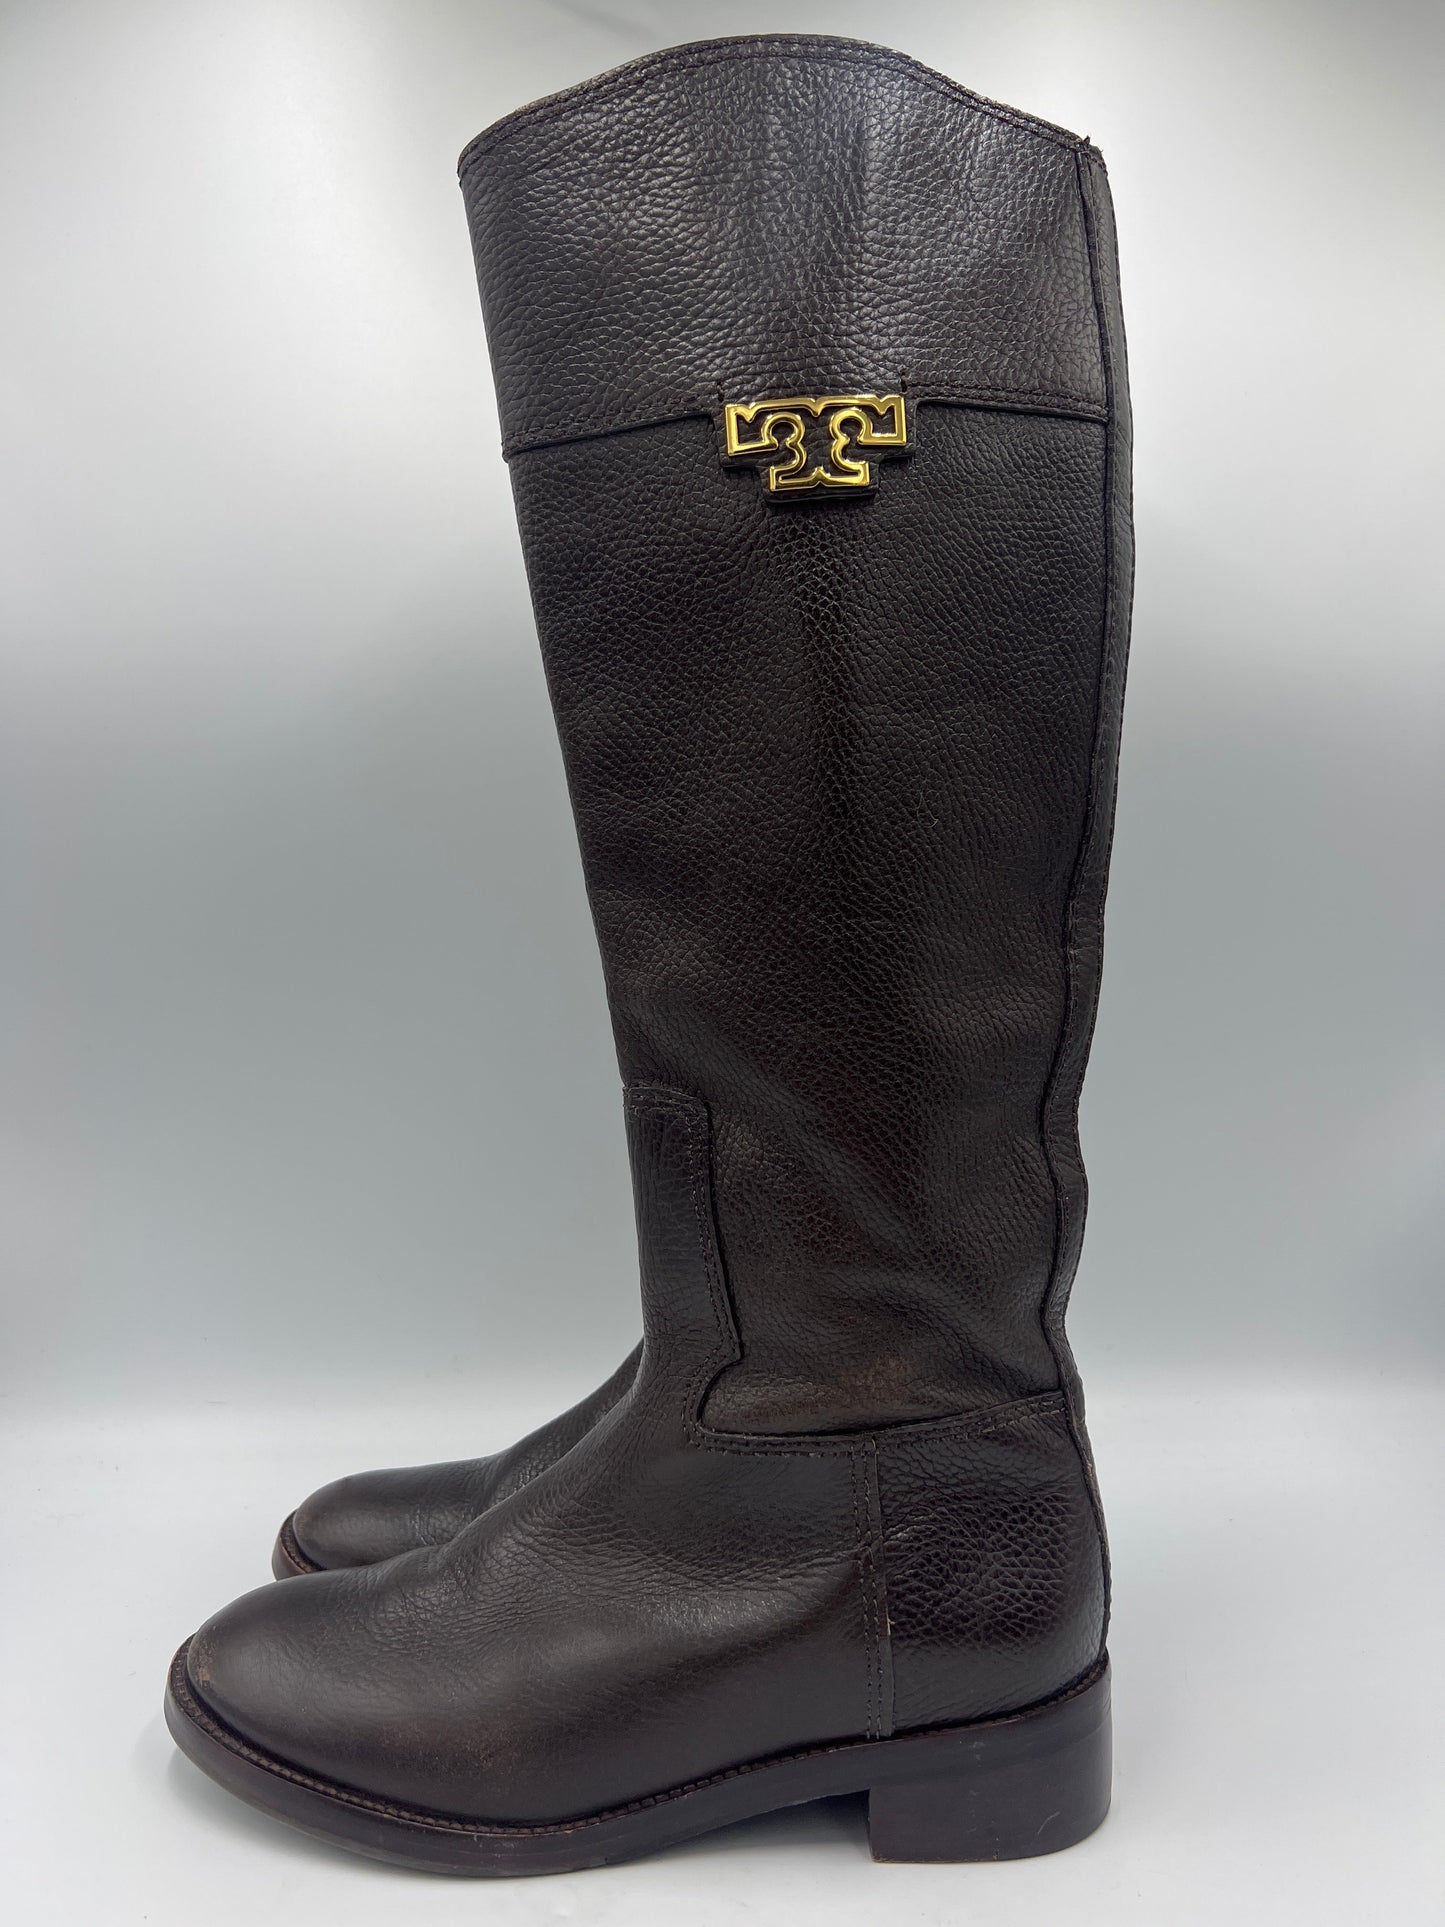 Boots Designer By Tory Burch  Size: 7